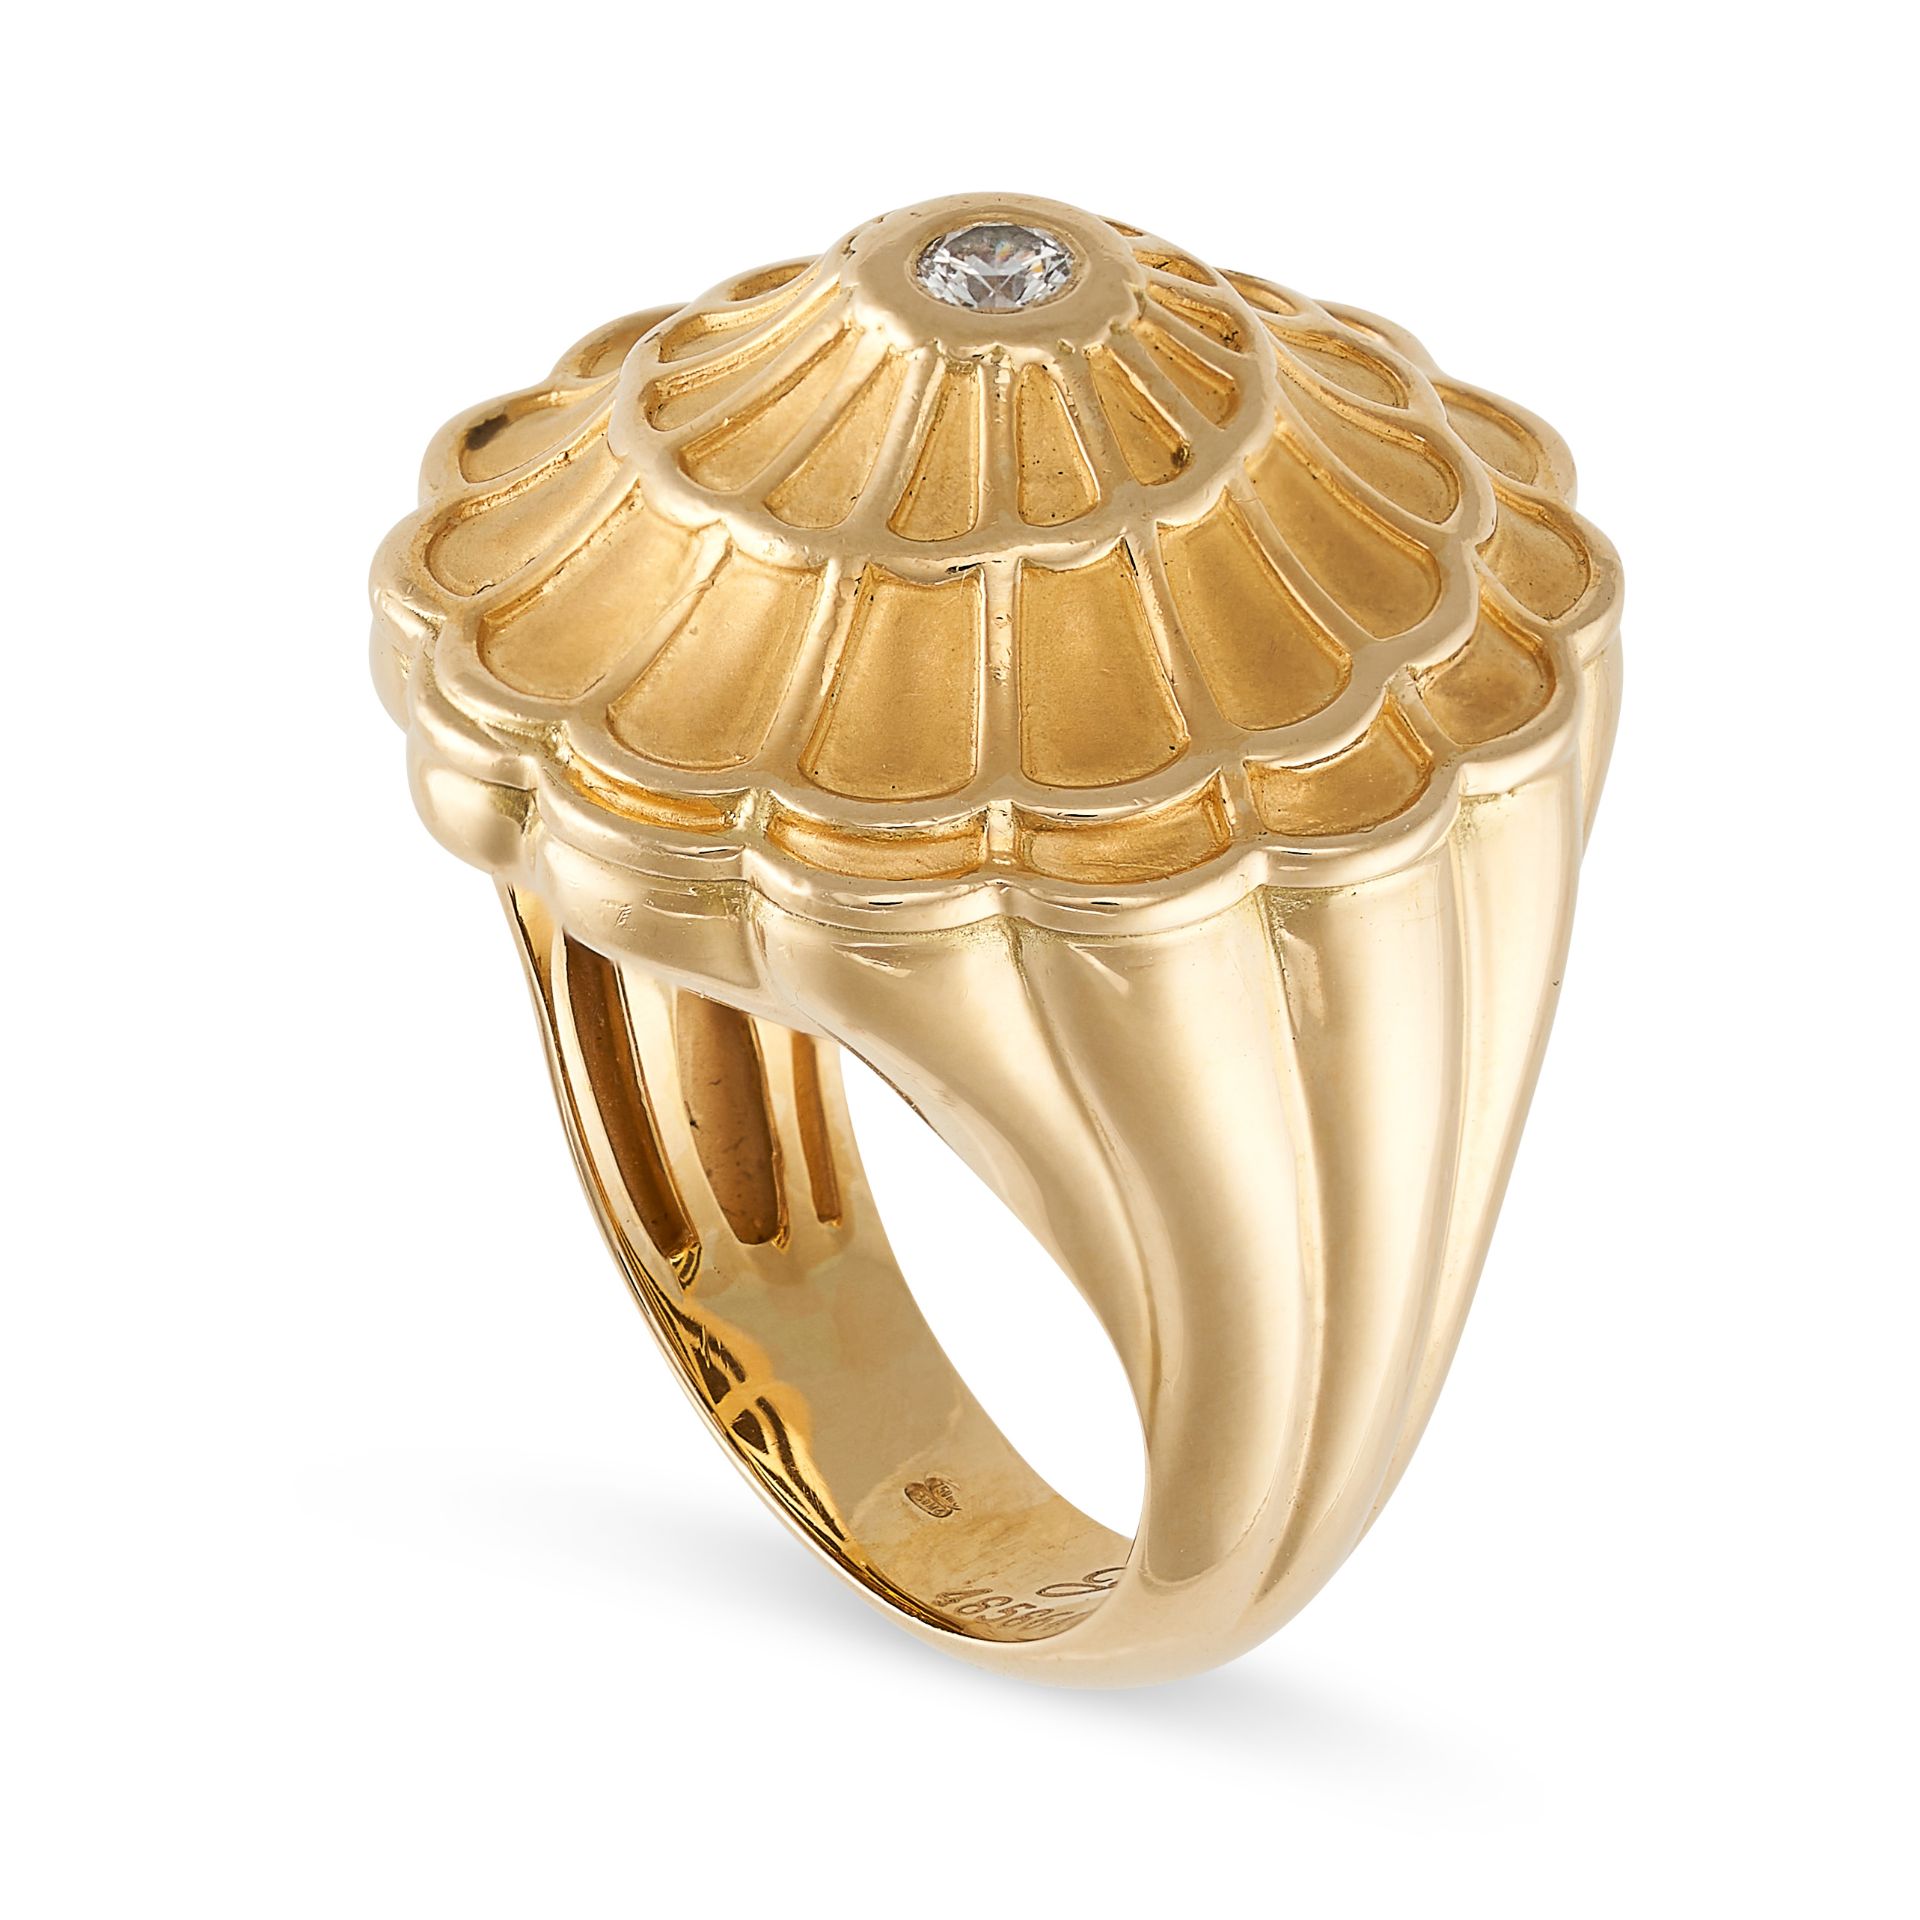 CARRERA Y CARRERA, A DIAMOND AFRODITA RING in 18ct yellow gold, the spiralling face set with a ce... - Image 2 of 2